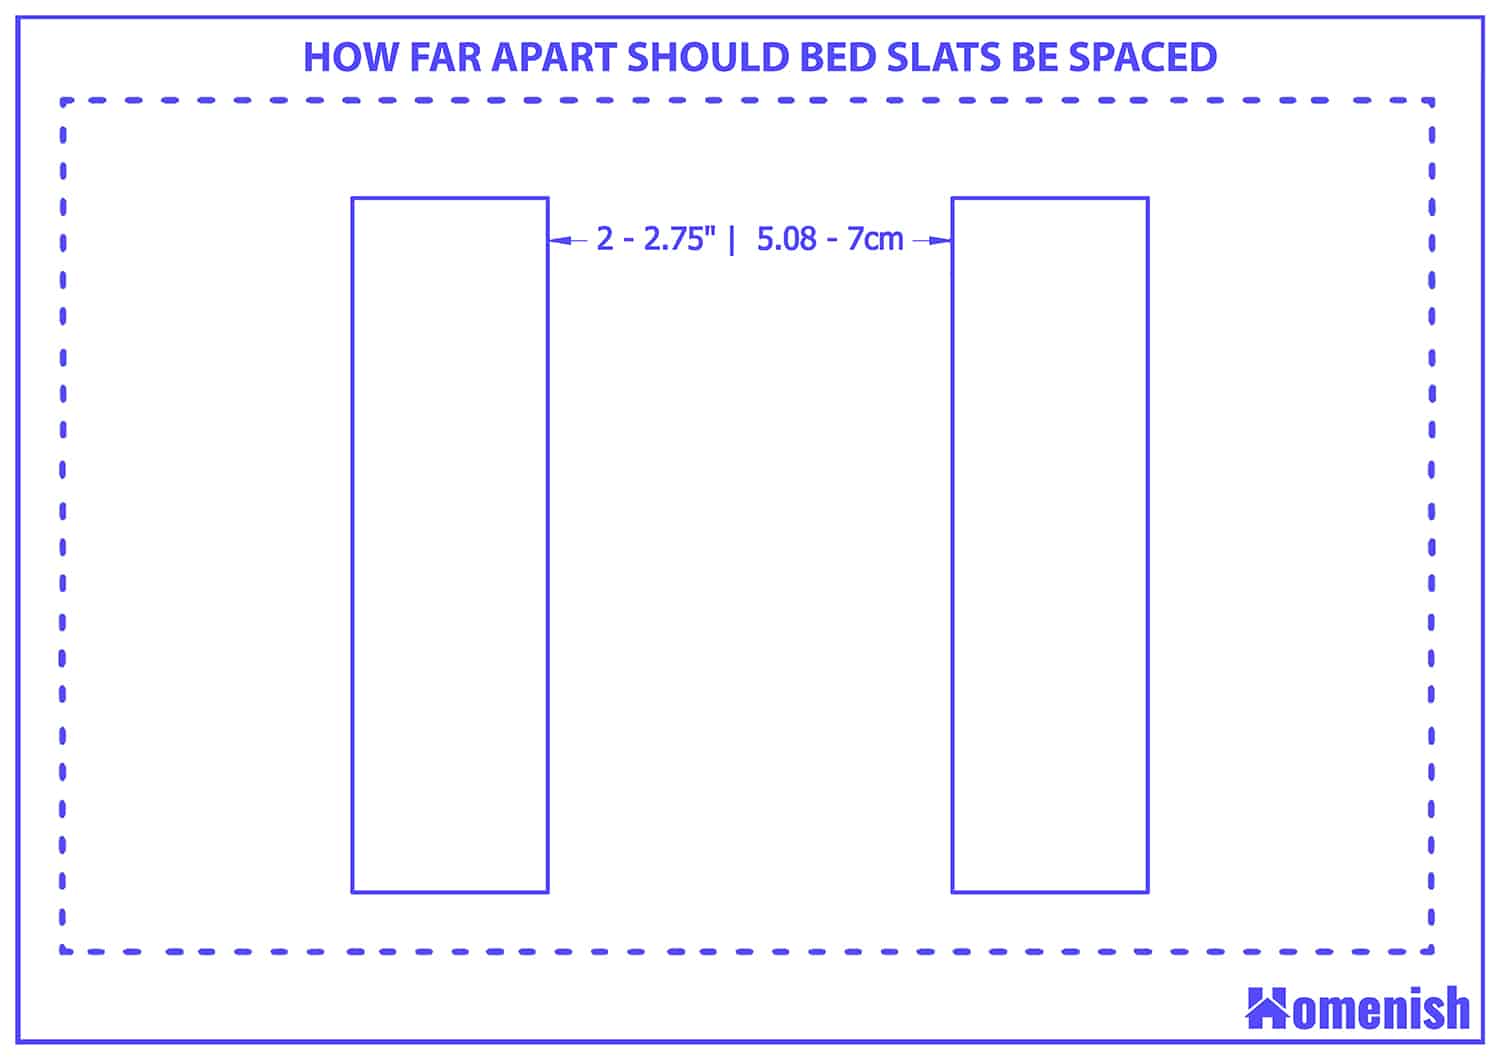 How far apart should bed slats be spaced